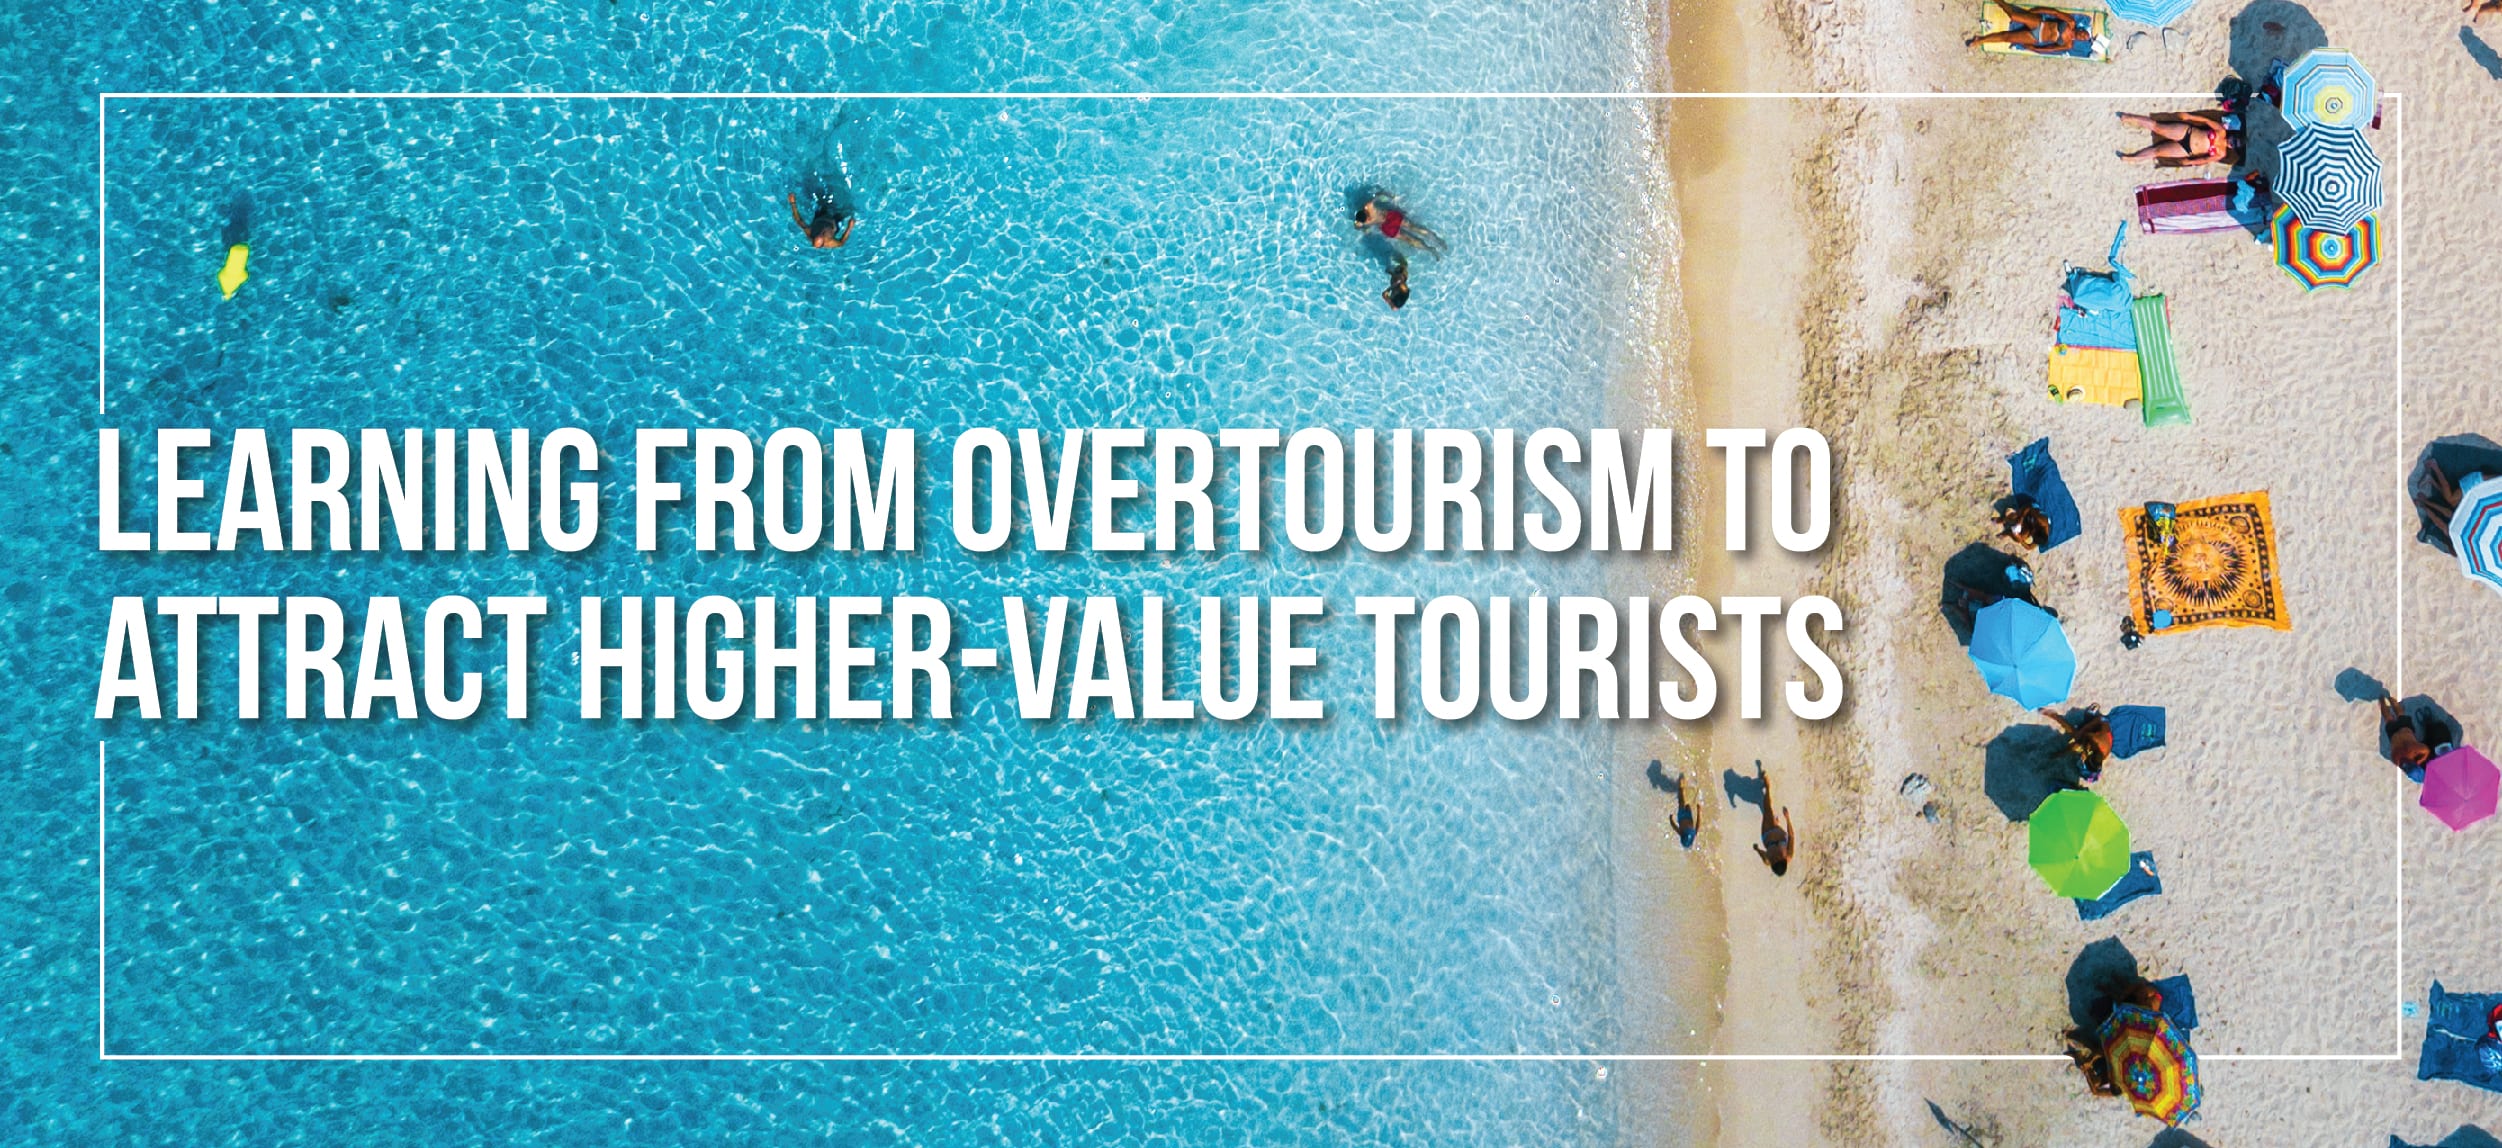 Attract Higher-Value Tourists